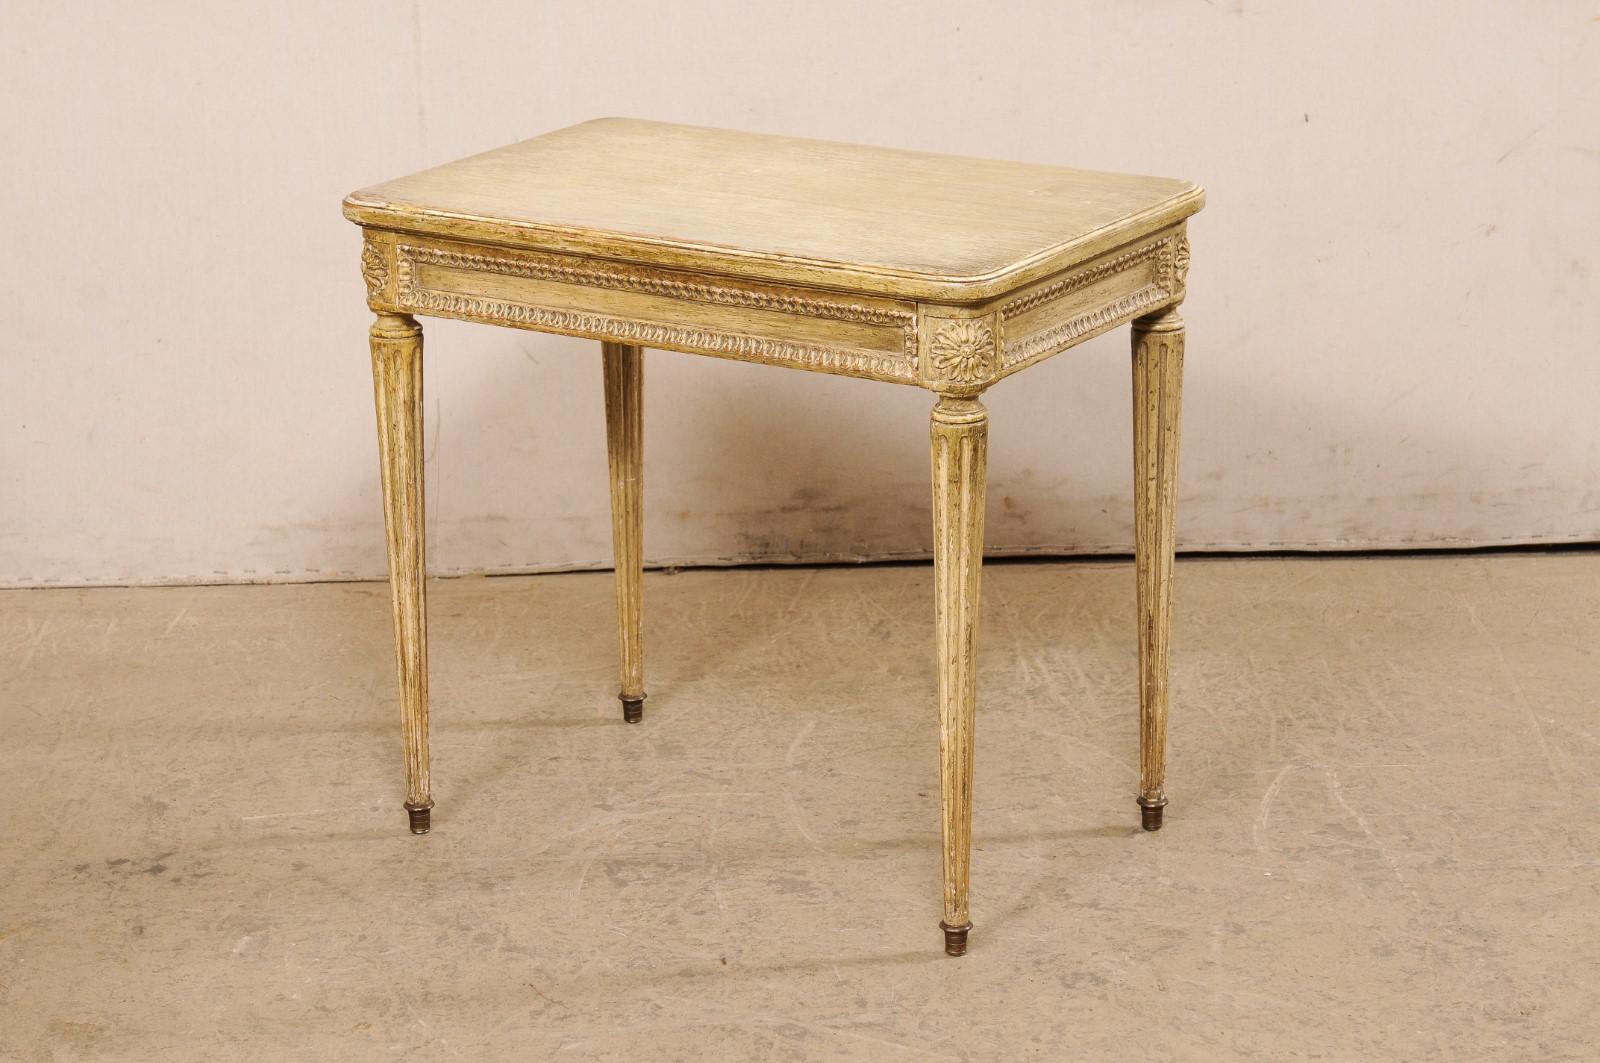 Louis XVI Style French Side Table with its Original Painted Finish Early 20th C. For Sale 6